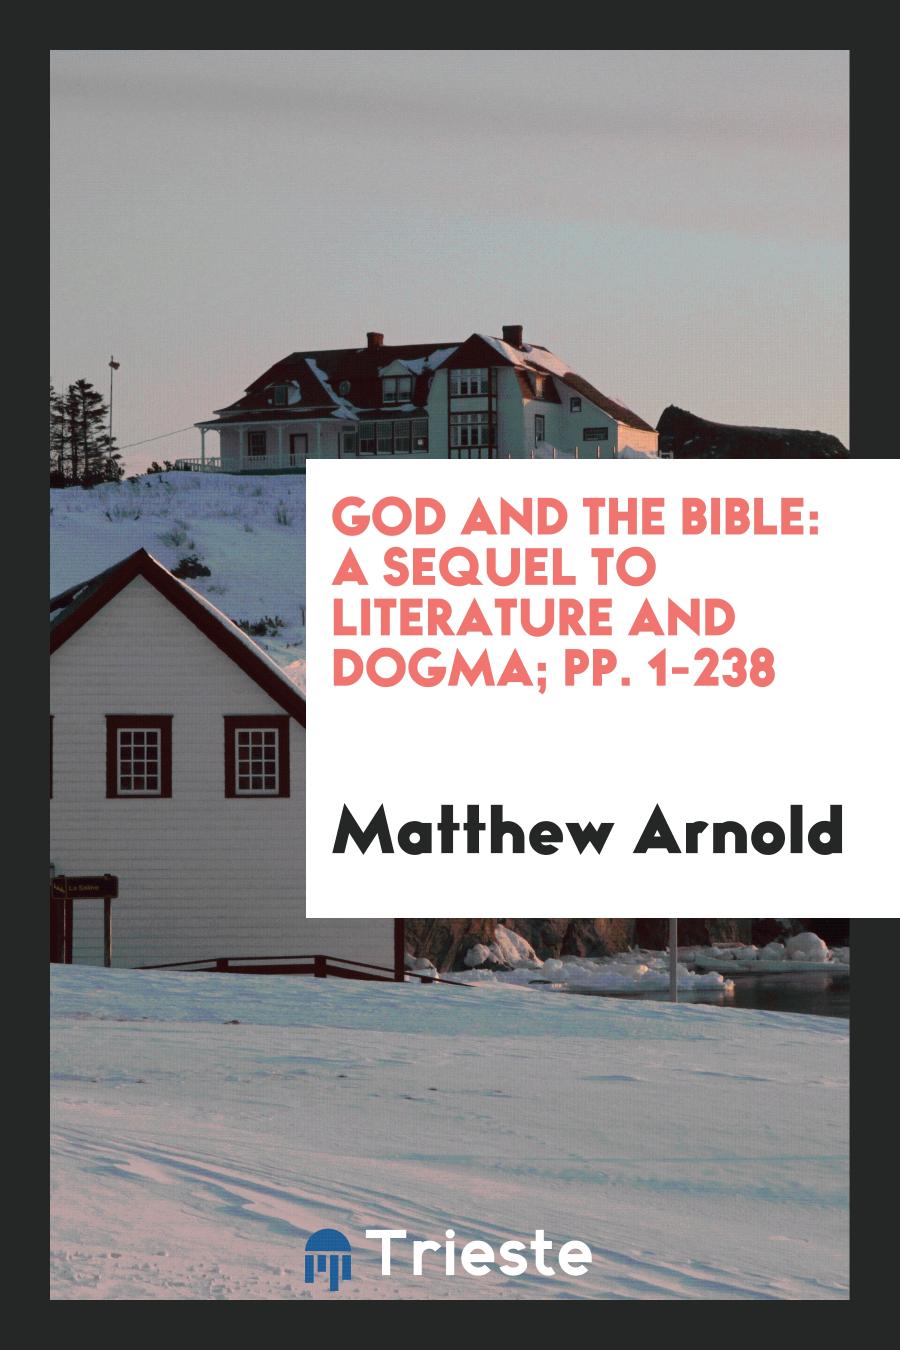 God and the Bible: A Sequel to Literature and Dogma; pp. 1-238